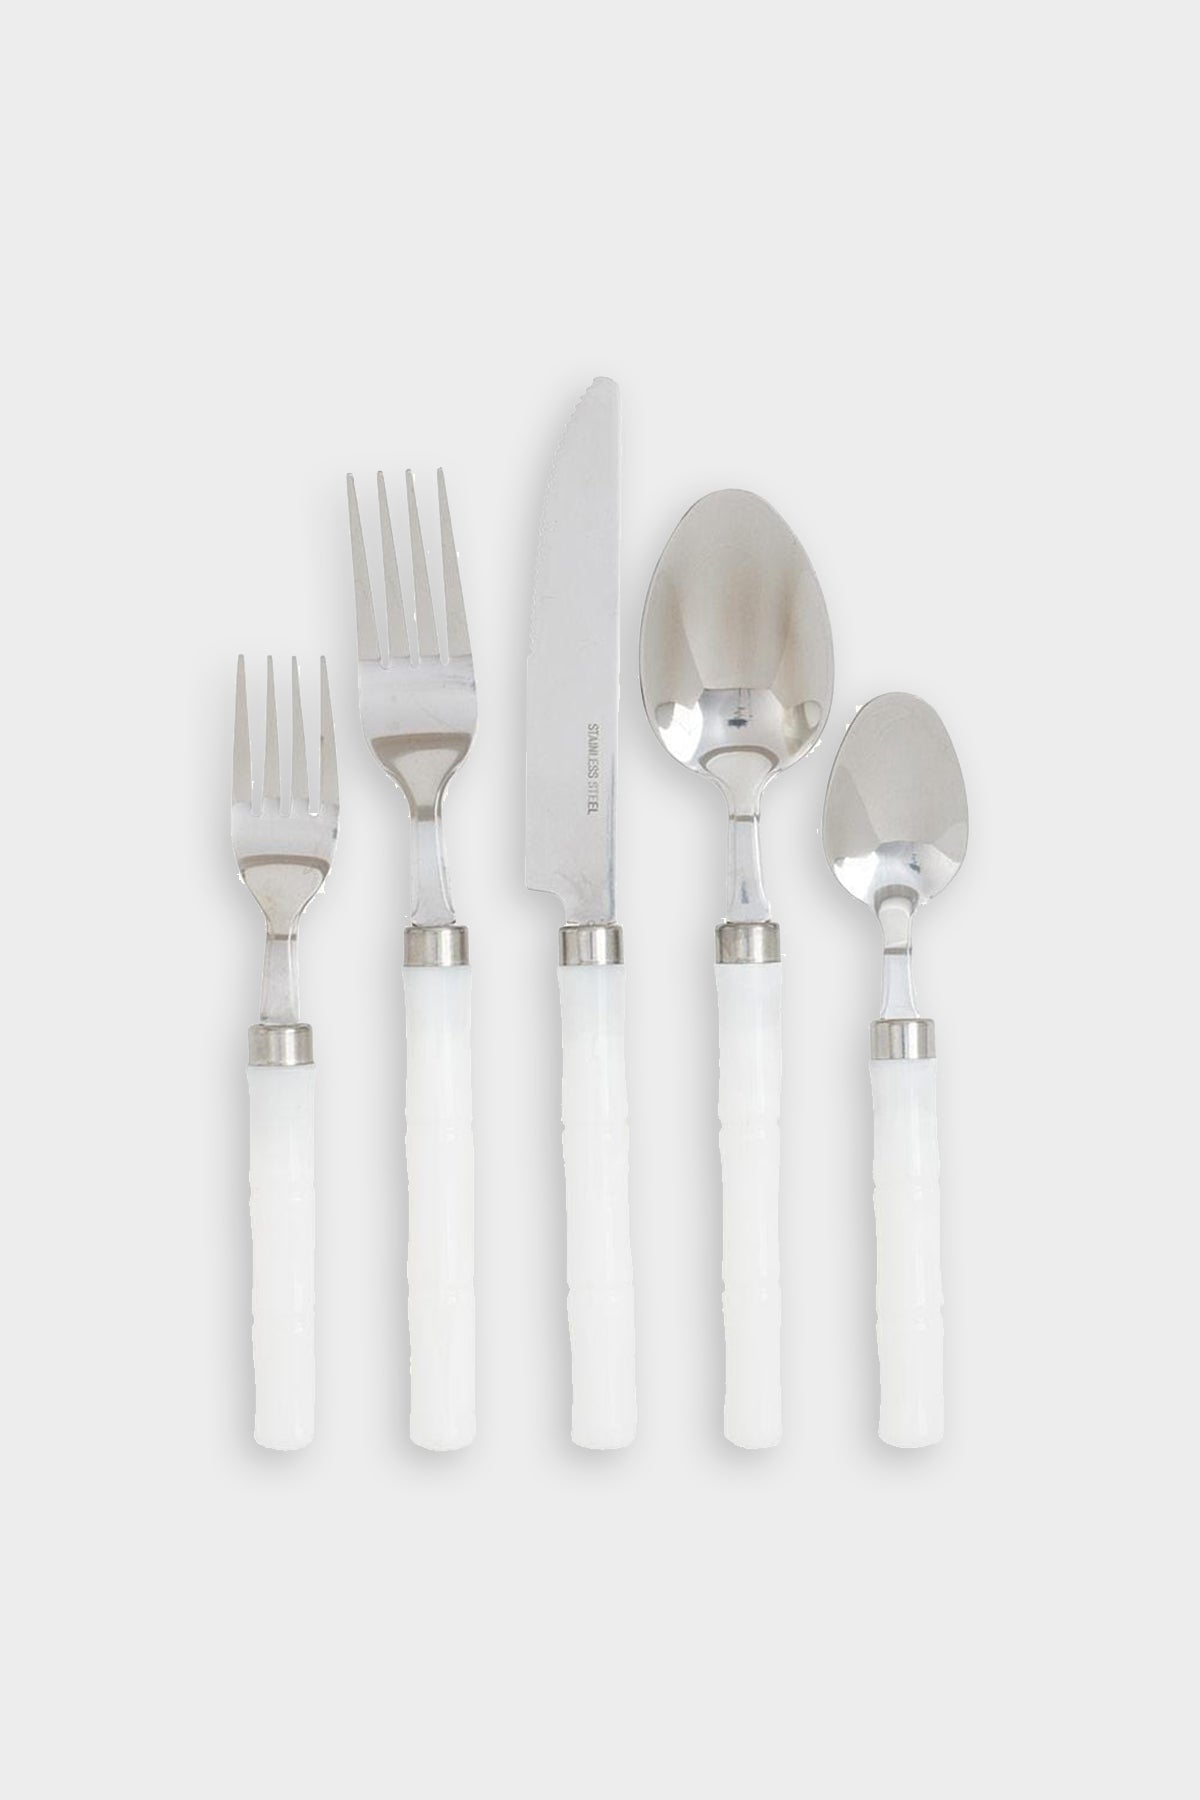 Bamboo Handle 5-Piece Stainless Steel Picnicware Set in White - shop-olivia.com